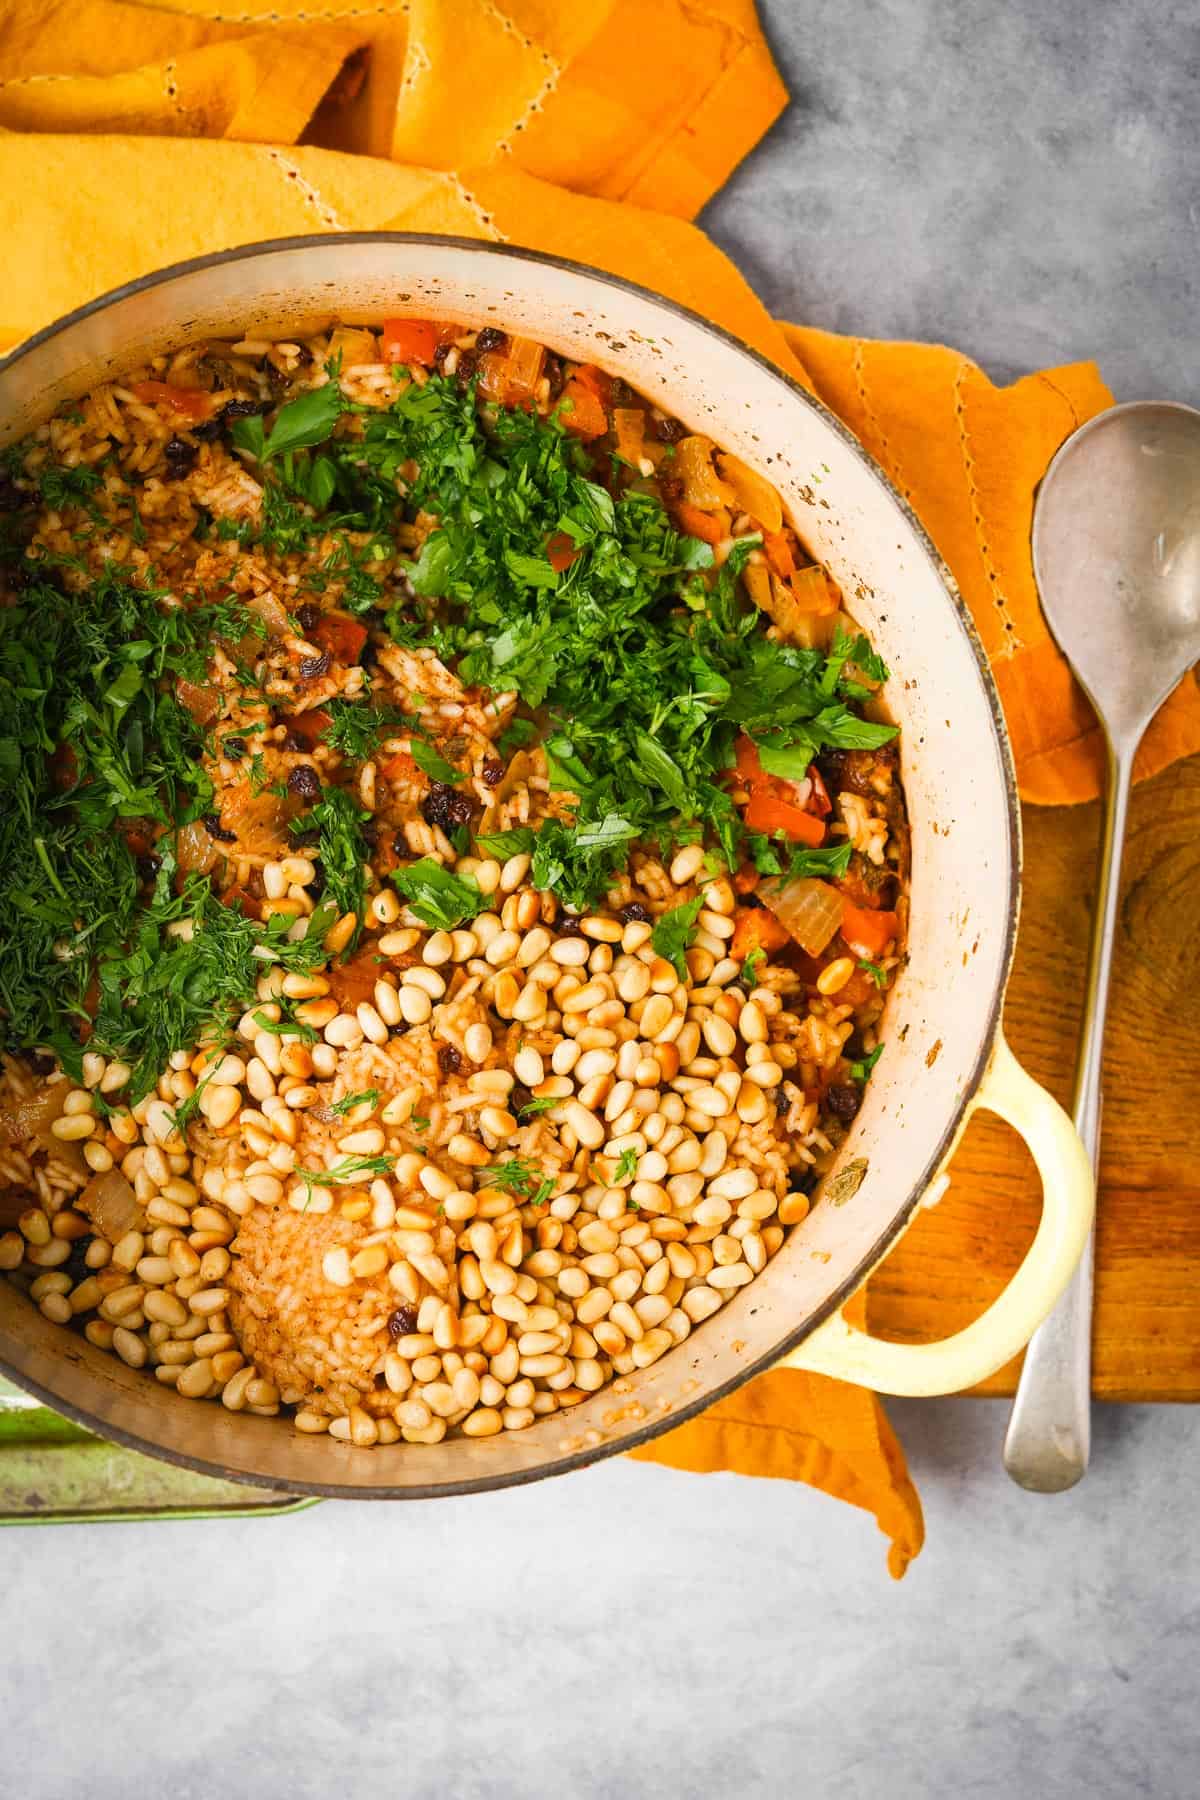 Herbs and toasted pine nuts are mixed into the cooked rice filling in a pot.